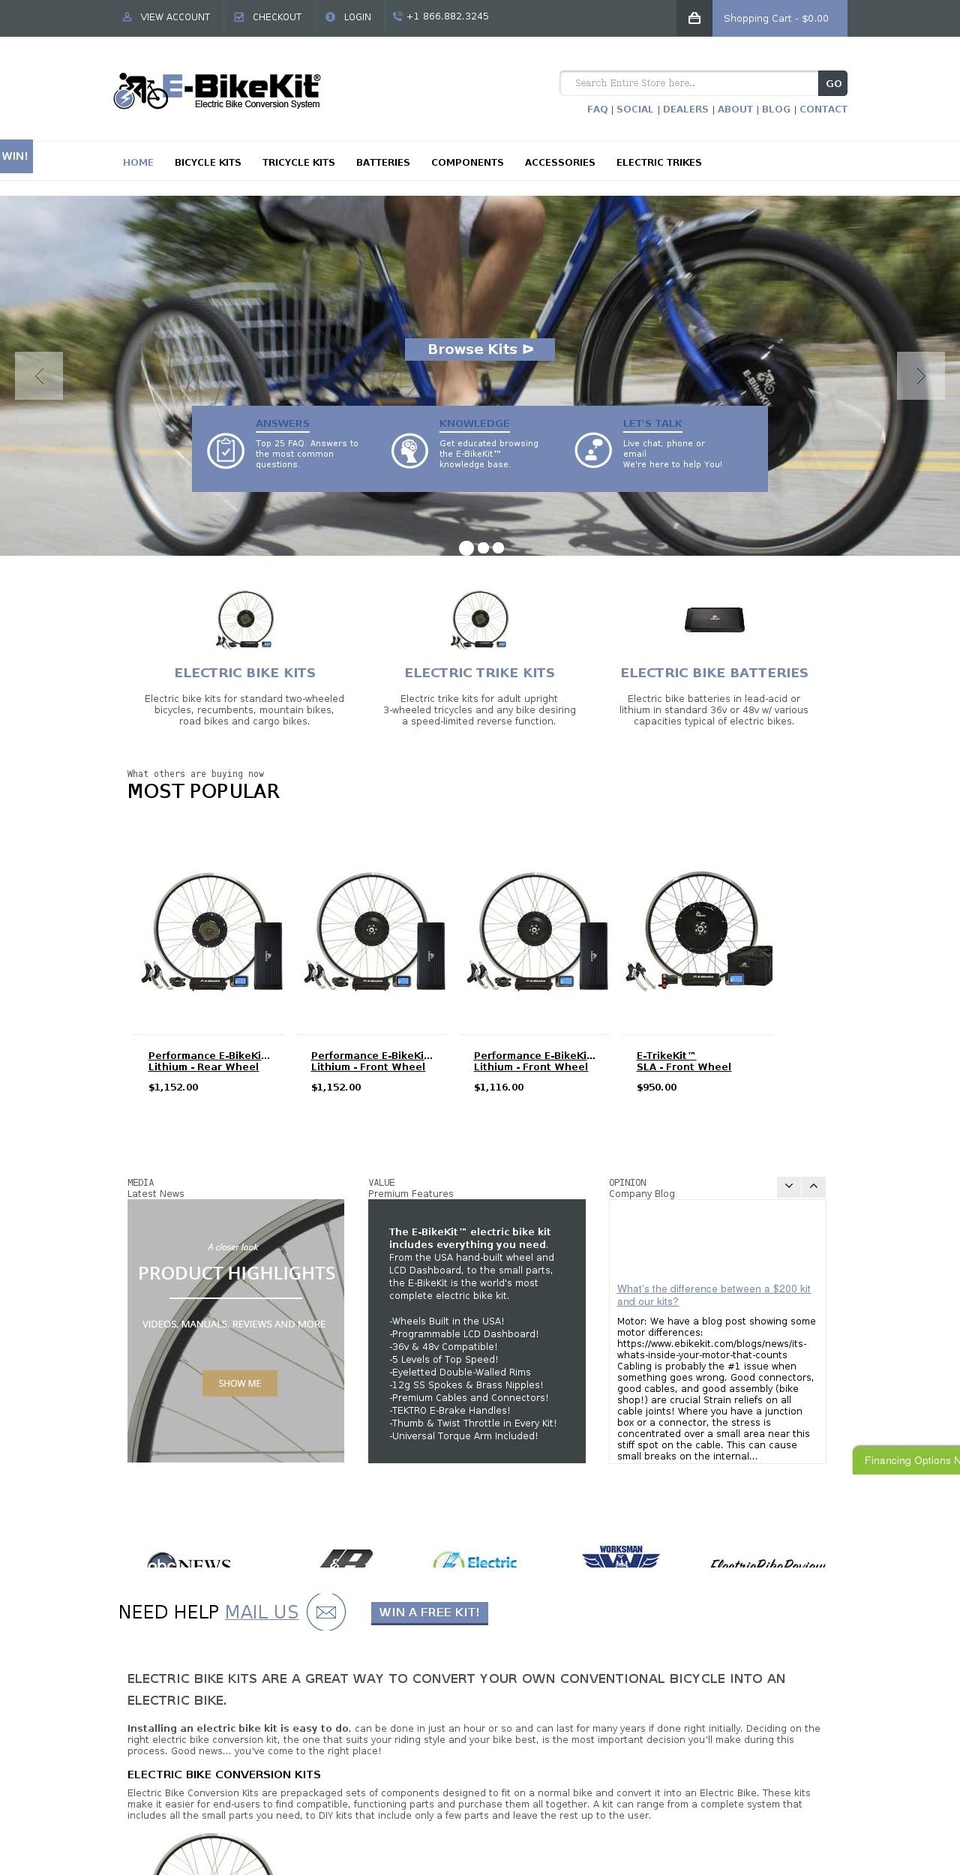 New Team Page: 10-Mar-17 Shopify theme site example ebikekit.info